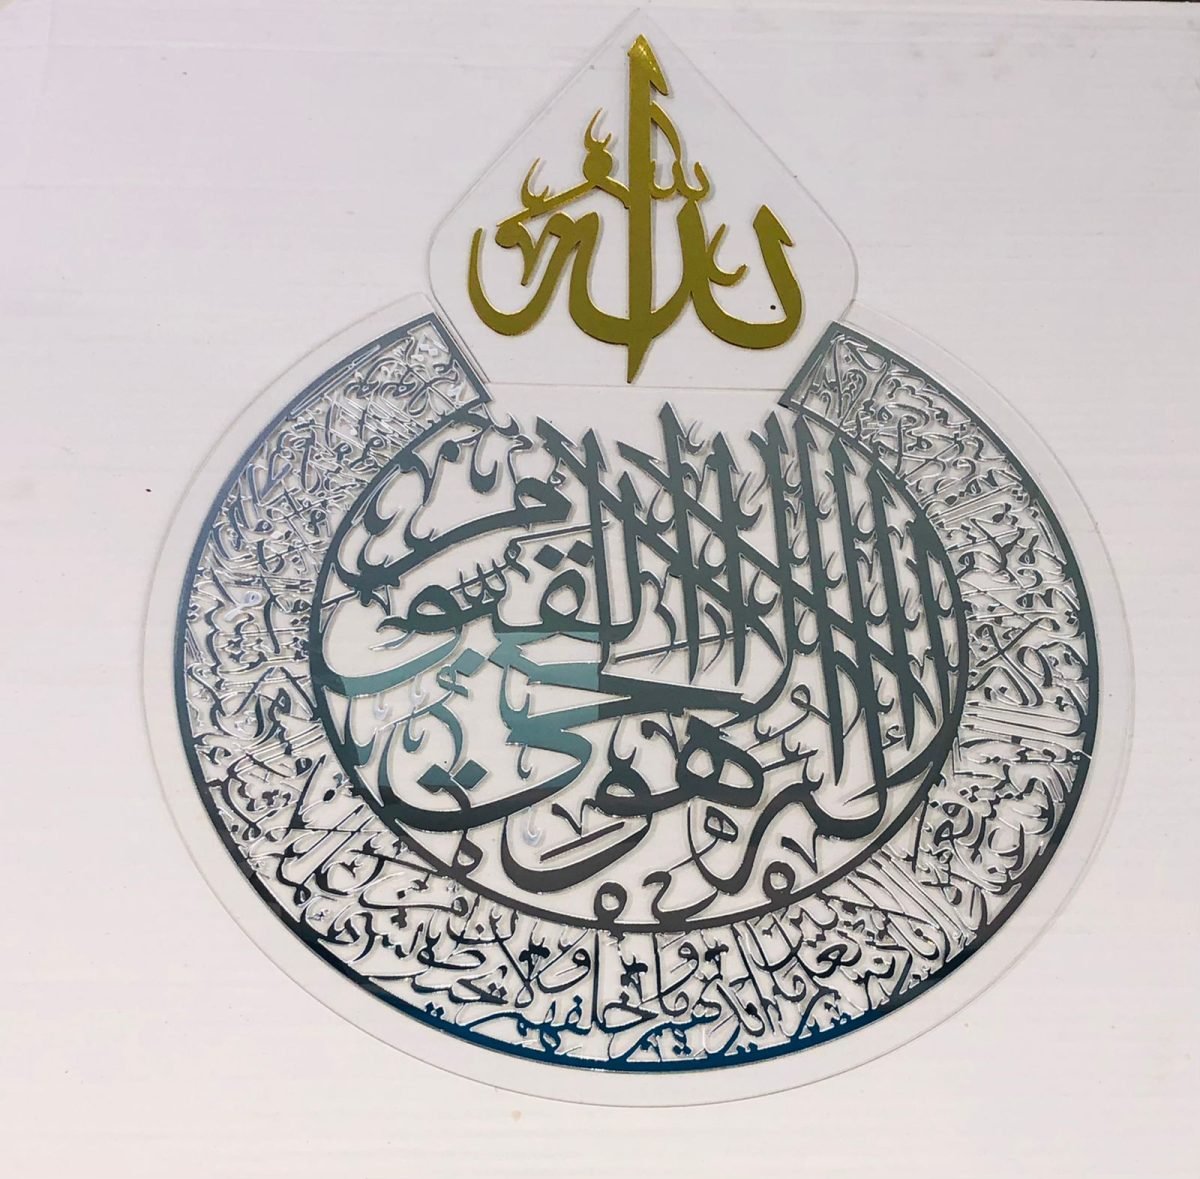 ISLAMIC CALLIGRAPHY Arts that have developed over the centuries come into existence in our decors with our modern interpretation. ✅ SHINY/HANDPAINTED WOODEN DECOR Our Wooden Islamic Wall Decors are made of 6 mm thick ecofriendly MDF (Medium Density fiberboard). Shiny acrylic layer is applied for shiny mirror effect. ✅ IDEAL RAMADAN DECORATION will enhance the atmosphere of your home during Mubarak Ramadan month/eid and remind you of Islamic values every time you look at it. ✅ MODERN & ELEGANCE LOOKING We offer modern and elegant alternatives instead of old fashionad decors that do not reflect the beauty of calligraphy.